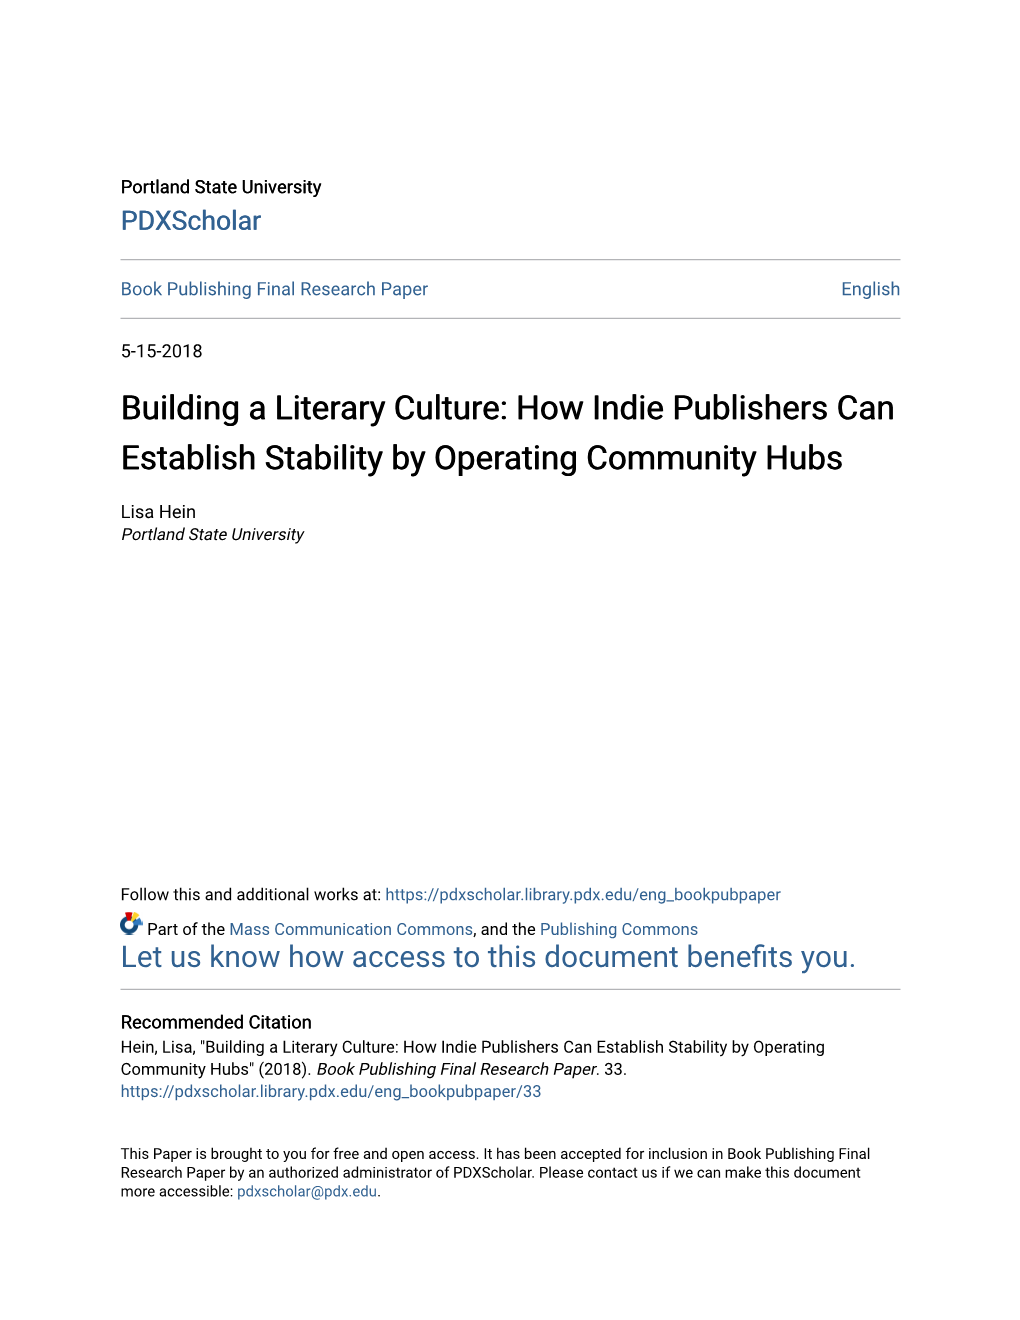 Building a Literary Culture: How Indie Publishers Can Establish Stability by Operating Community Hubs